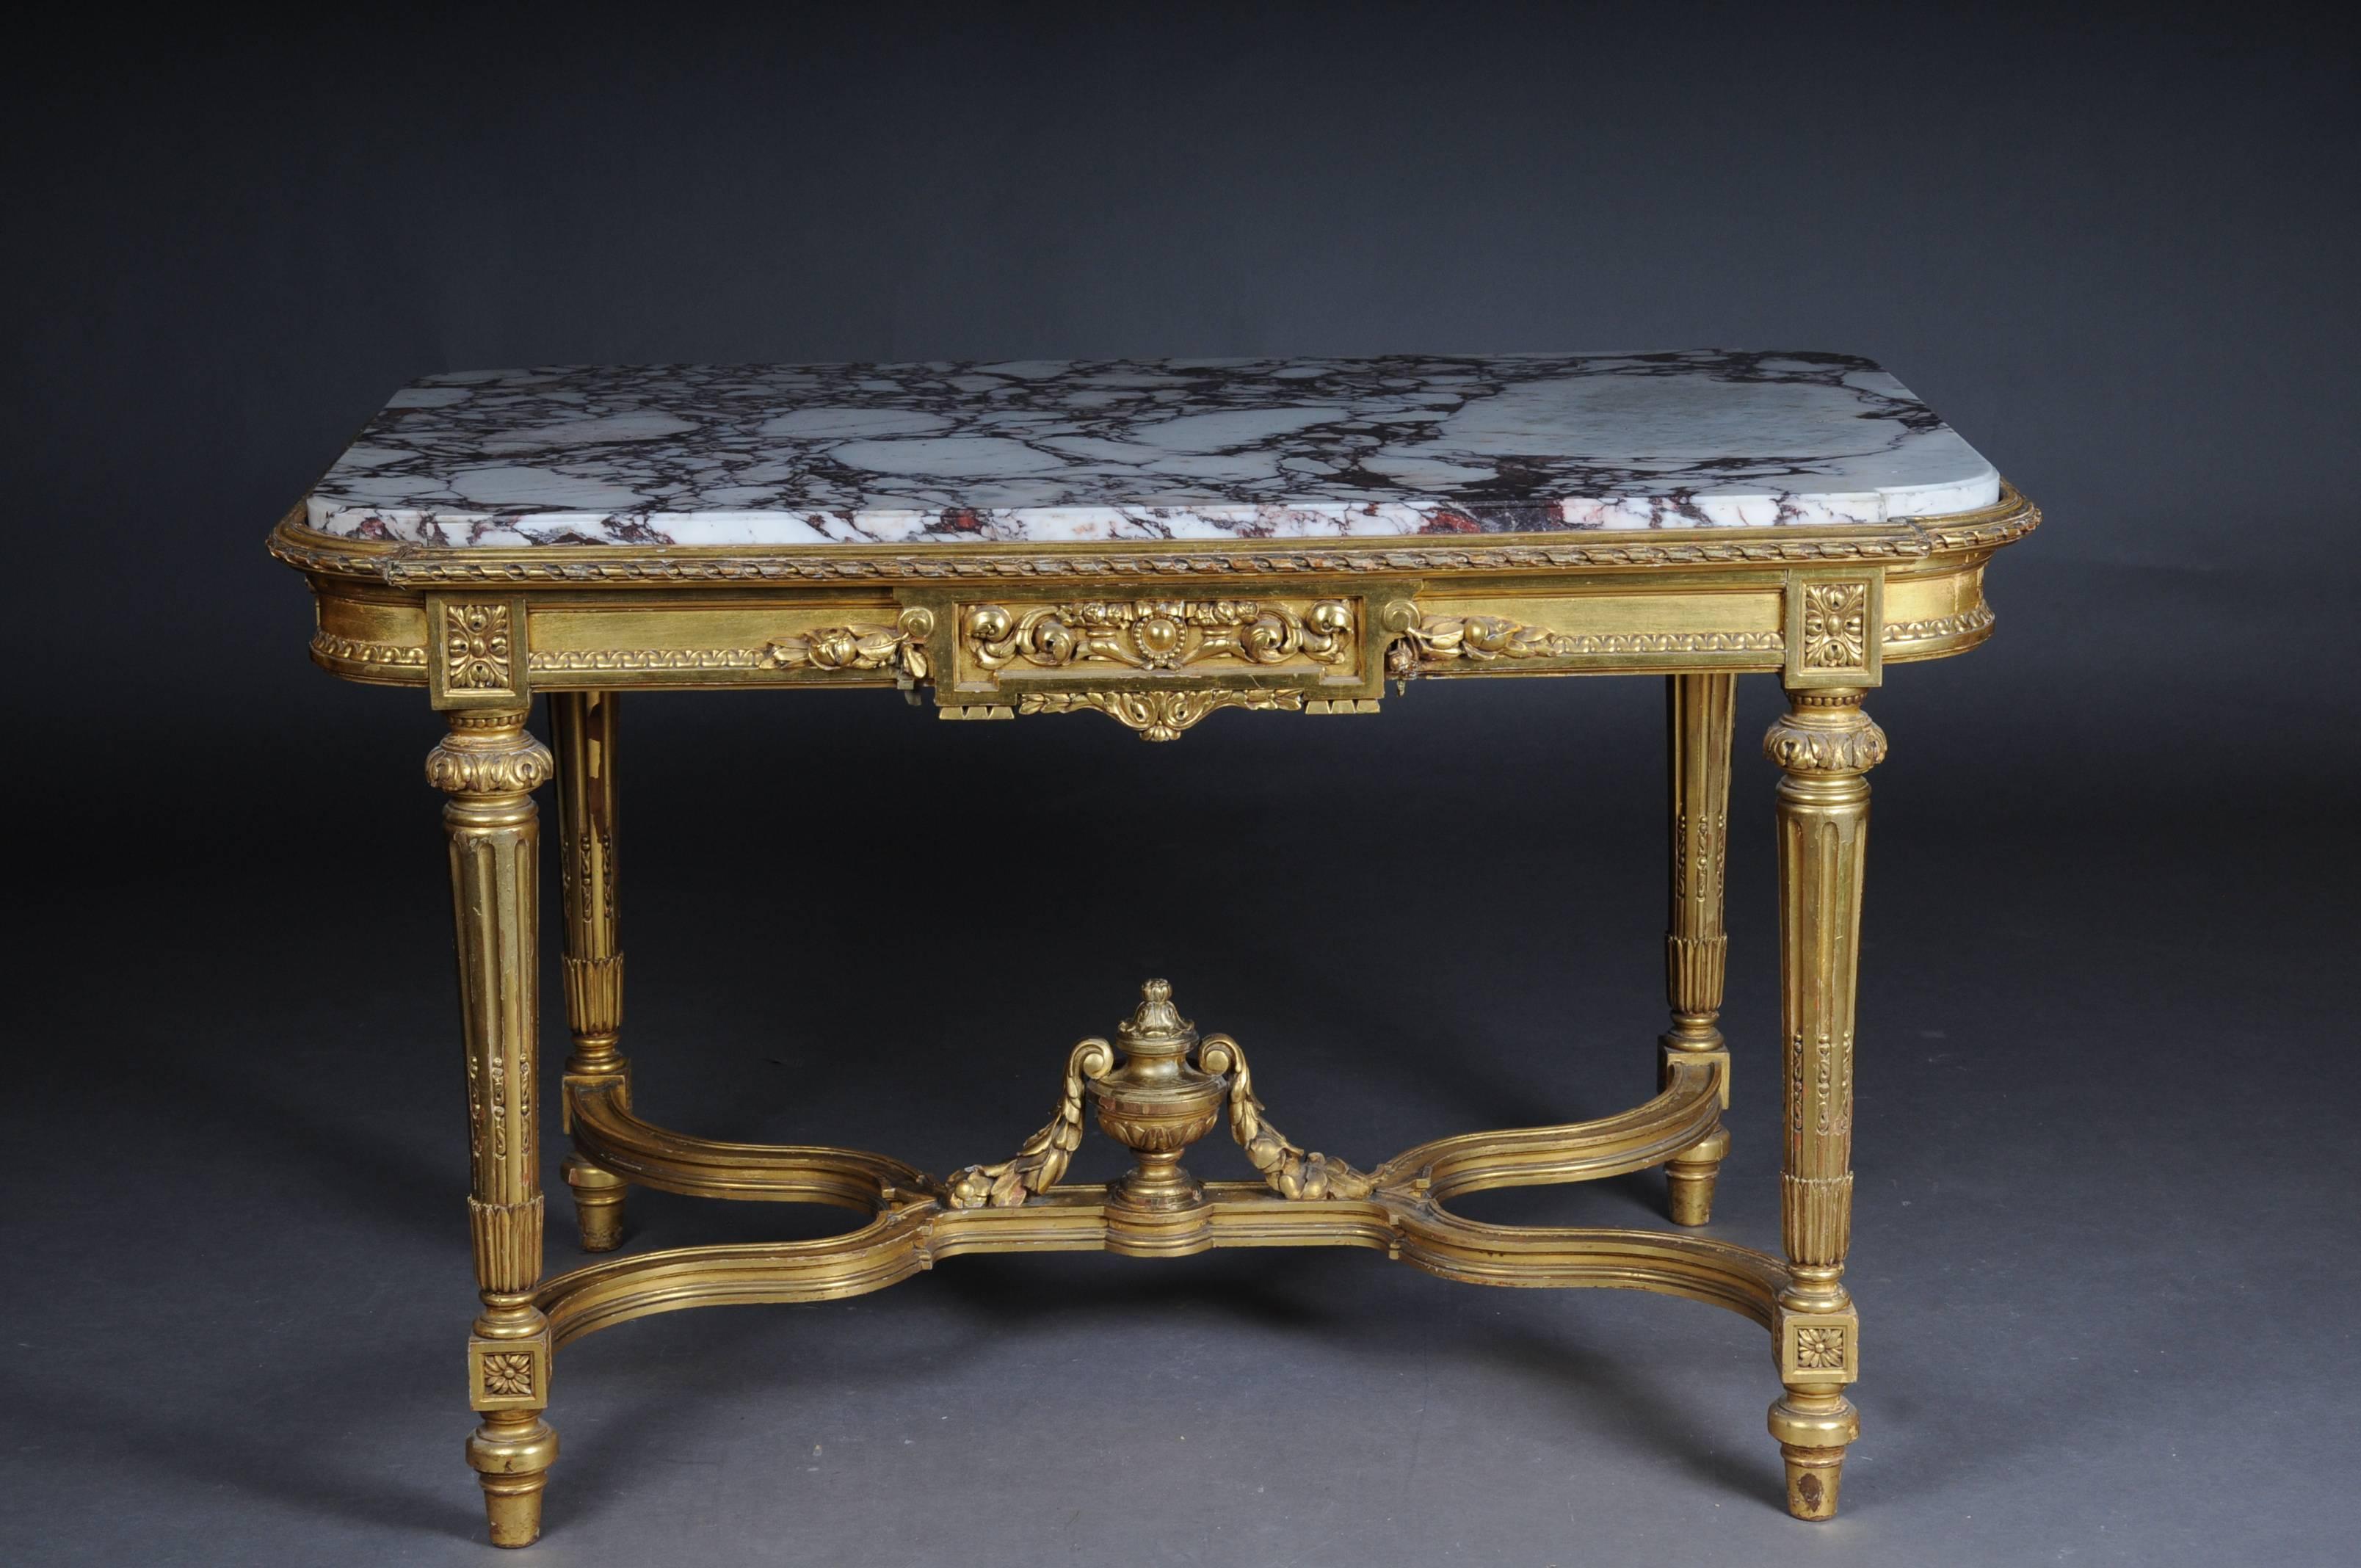 Amazing French Louis XVI Salon table gilded, around 1910

Solid wood oak, carved and gold leaf. The table is finely carved down to the last detail. On conical, fluted, carved legs, connected with X-shaped, heavily carved gutter.
On the cover